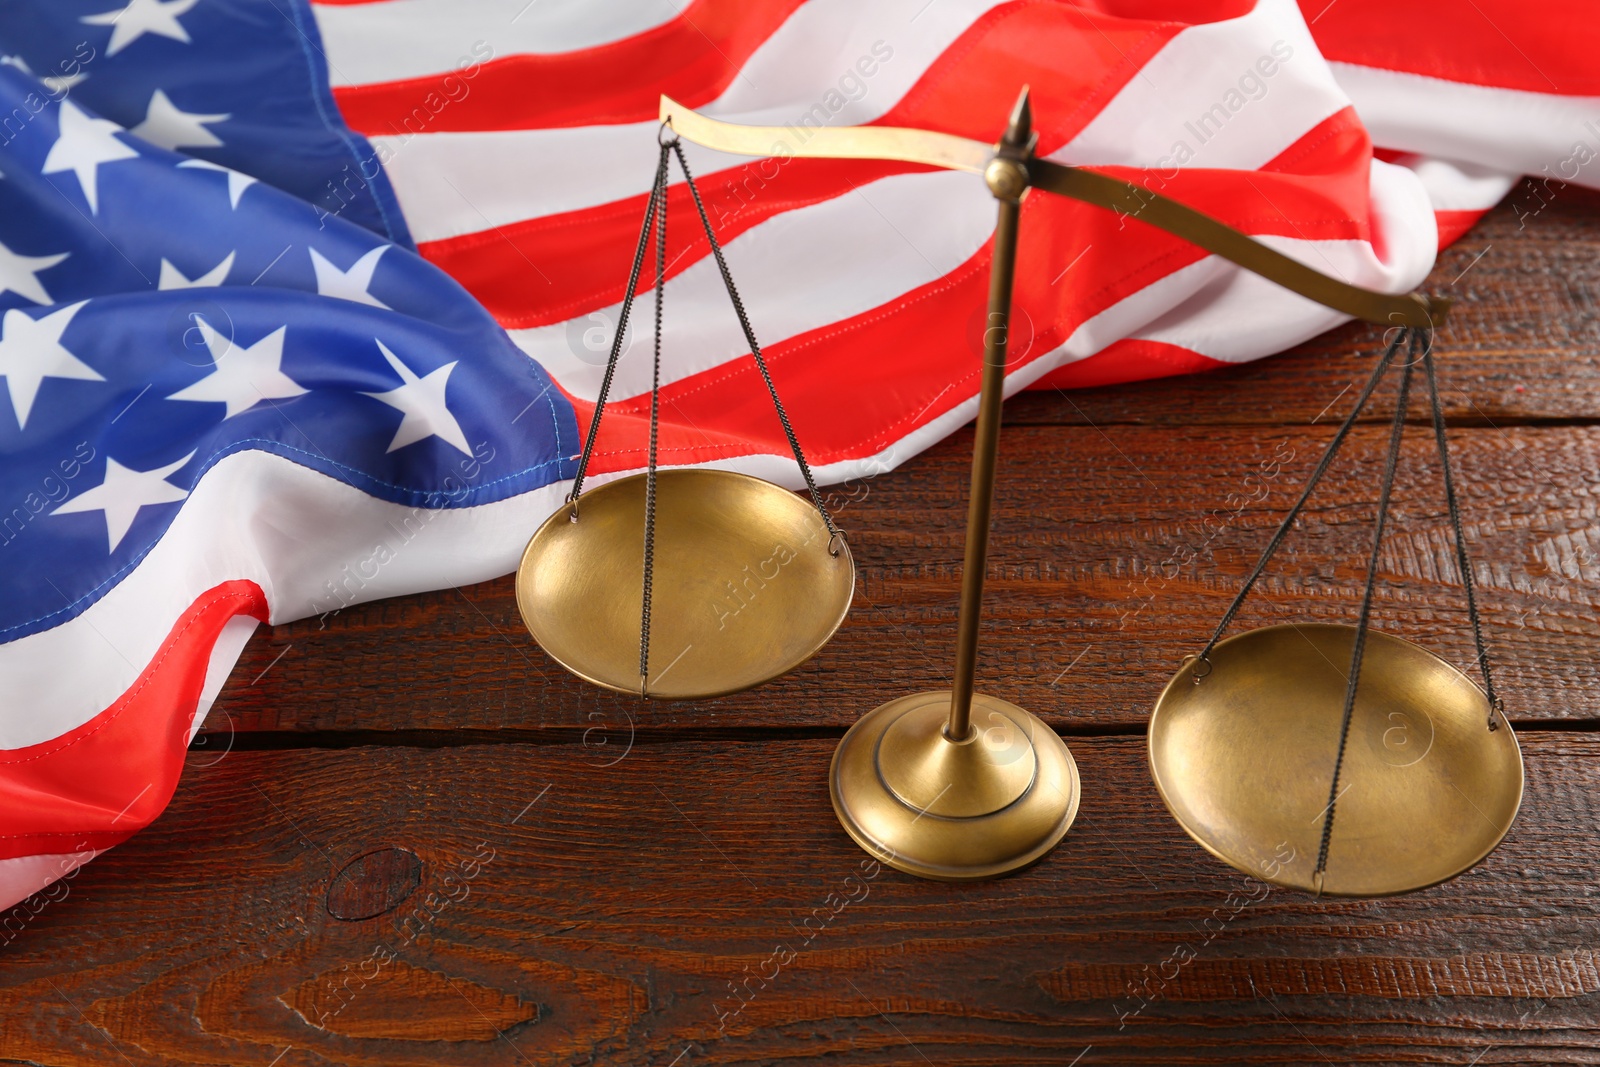 Photo of Scales of justice and American flag on wooden table